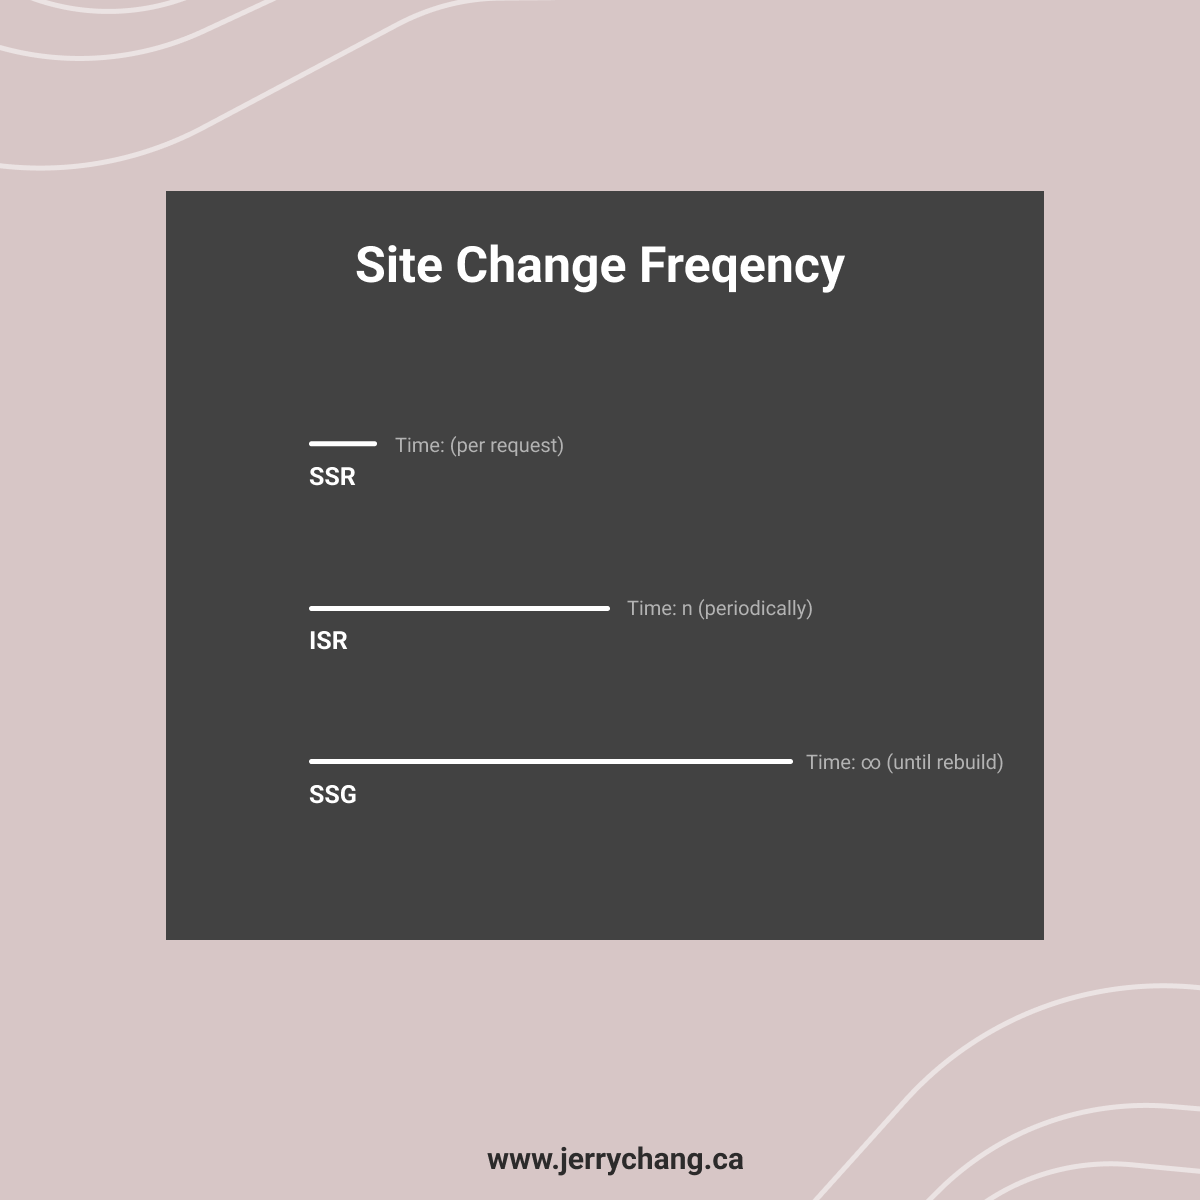 How frequently does the site need to change ?